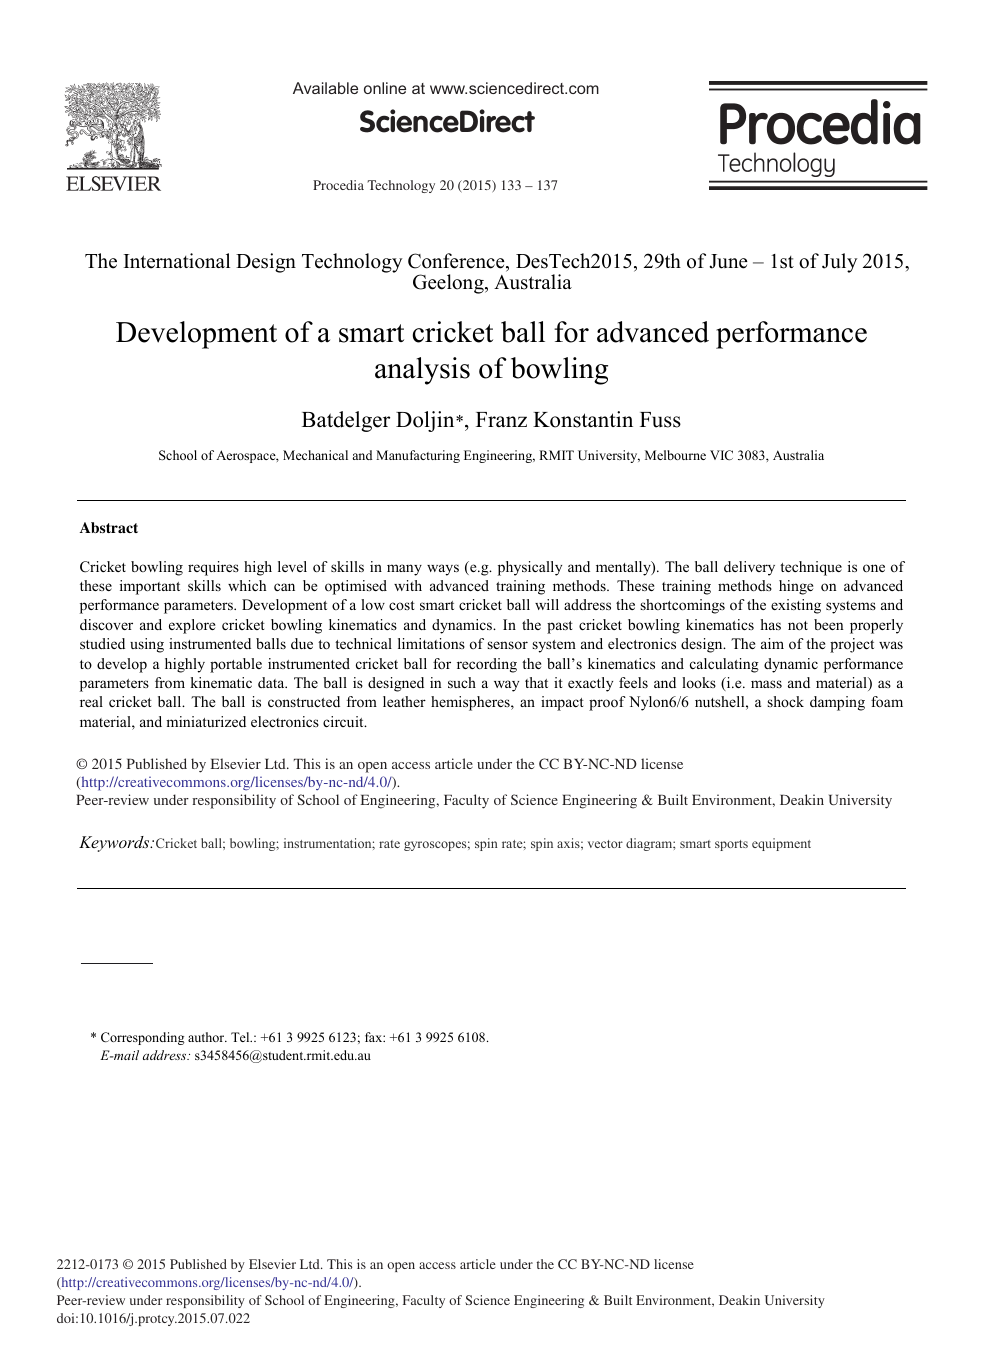 Development of a Smart Cricket Ball for Advanced Performance Analysis of Bowling